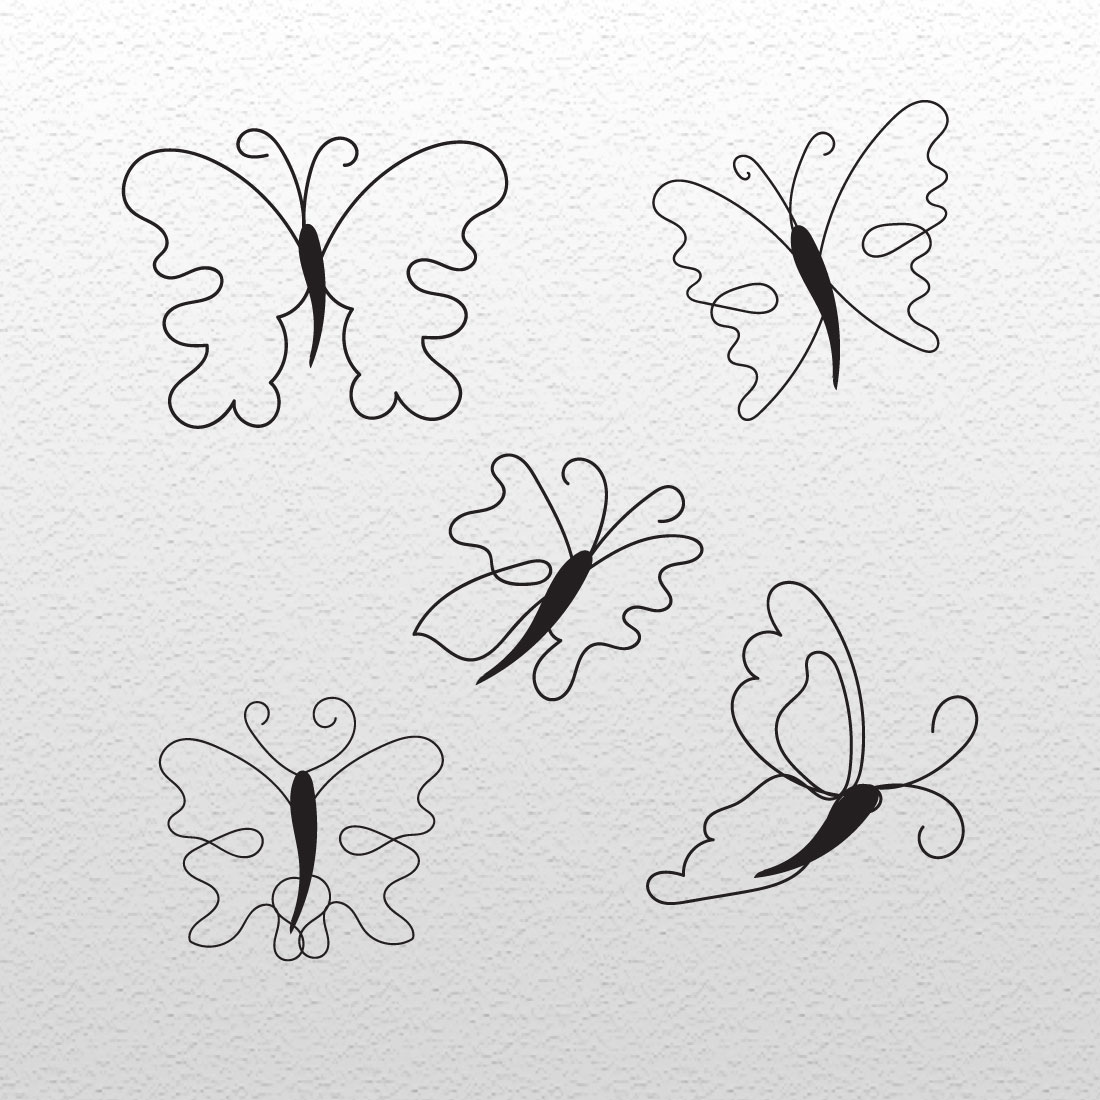 Drawing of four butterflies on a white background.